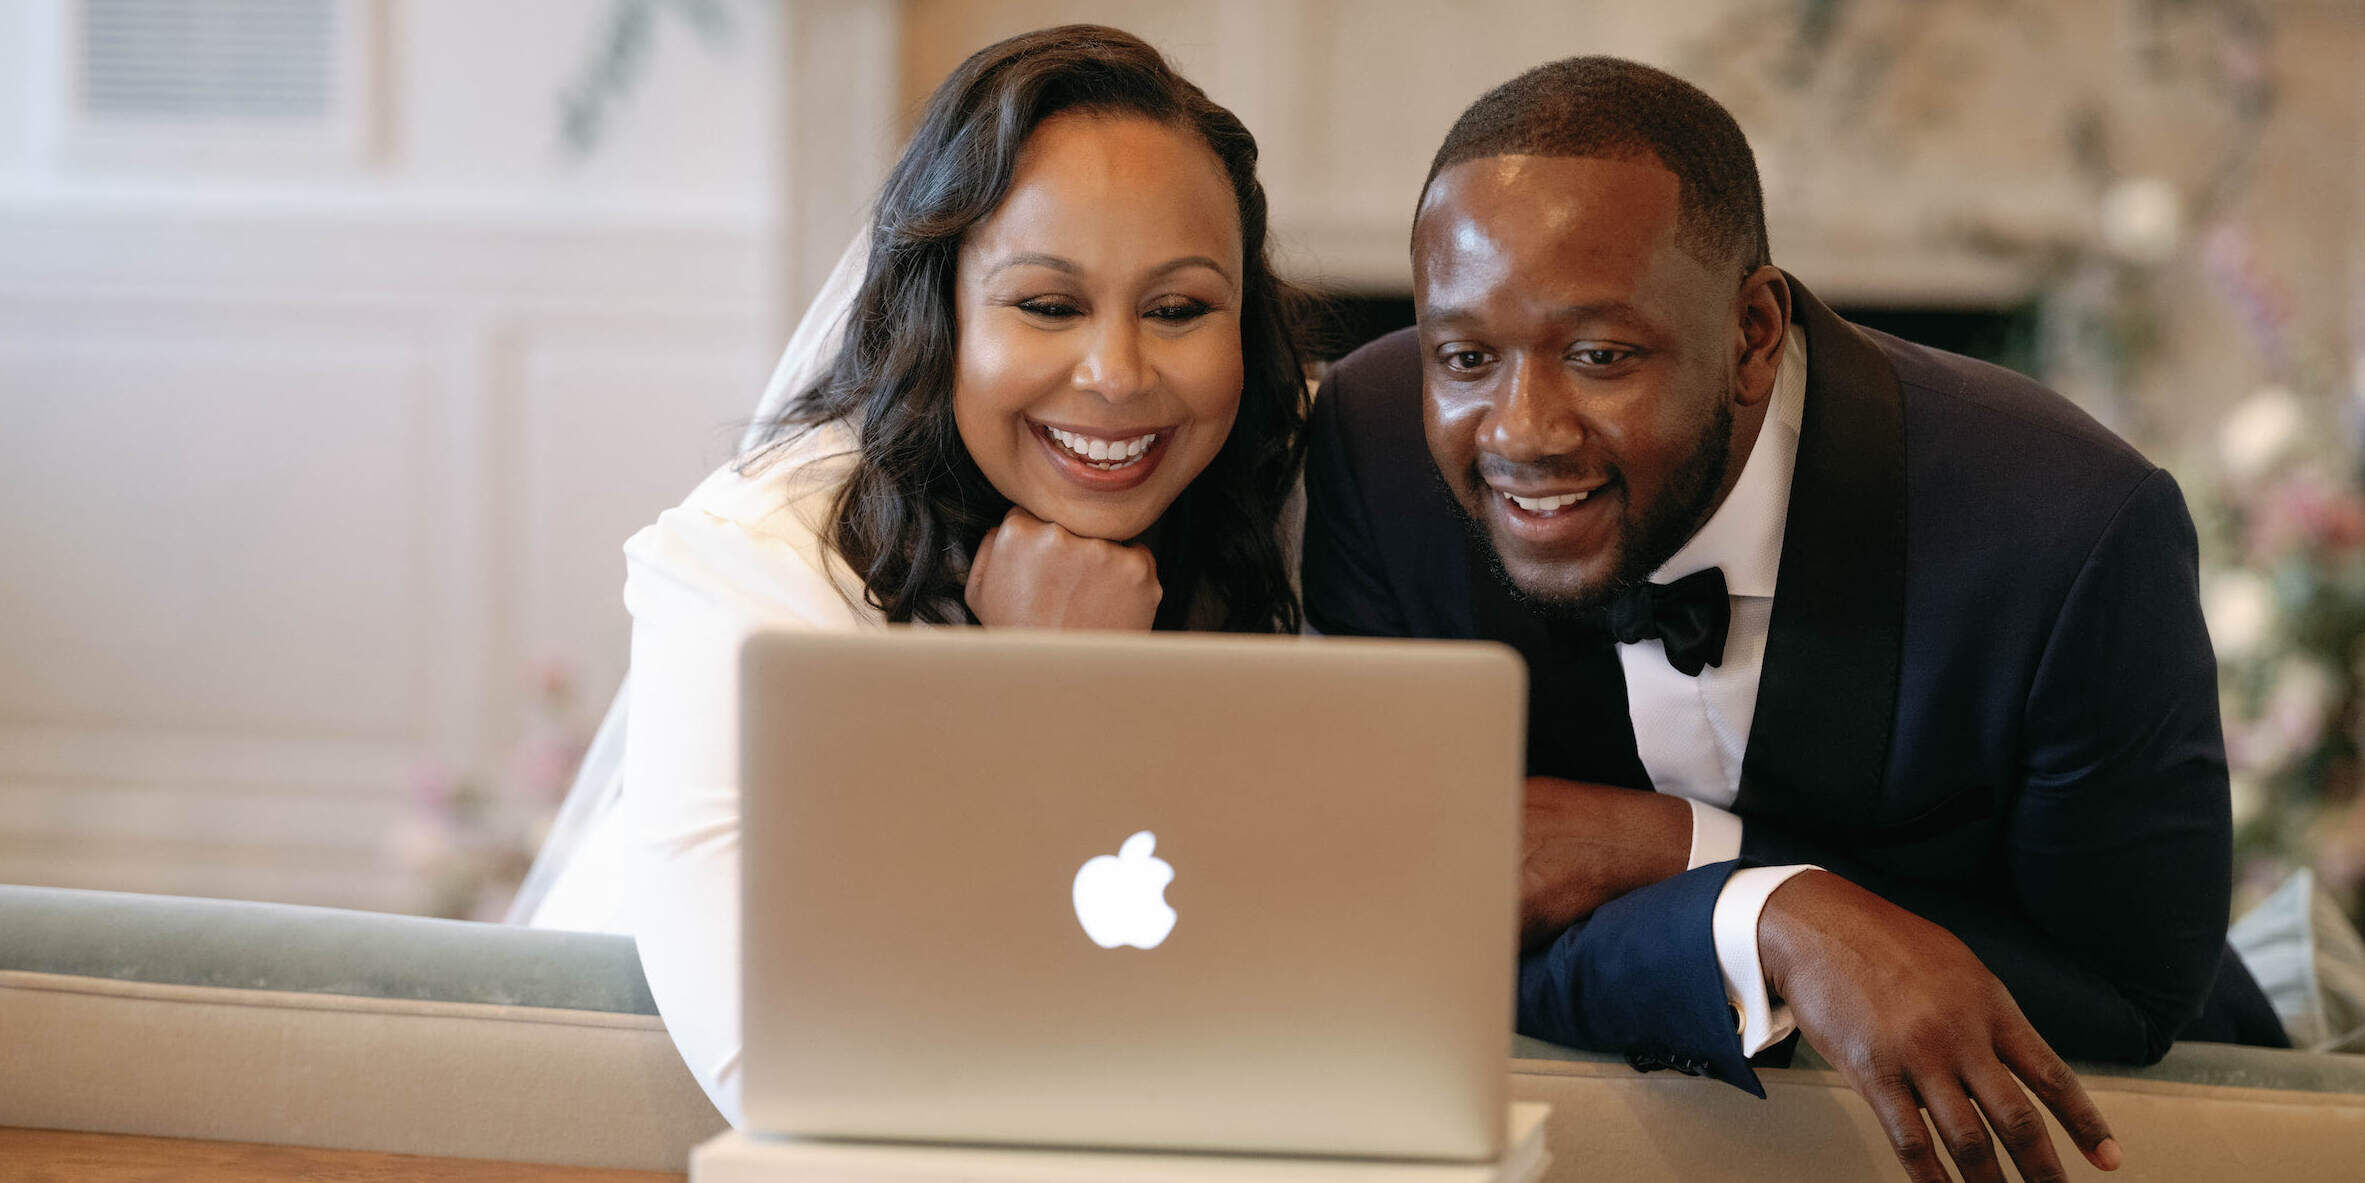 Elopement Wedding: A pandemic bride and groom sit at a laptop computer, FaceTiming their families during their intimate elopement.